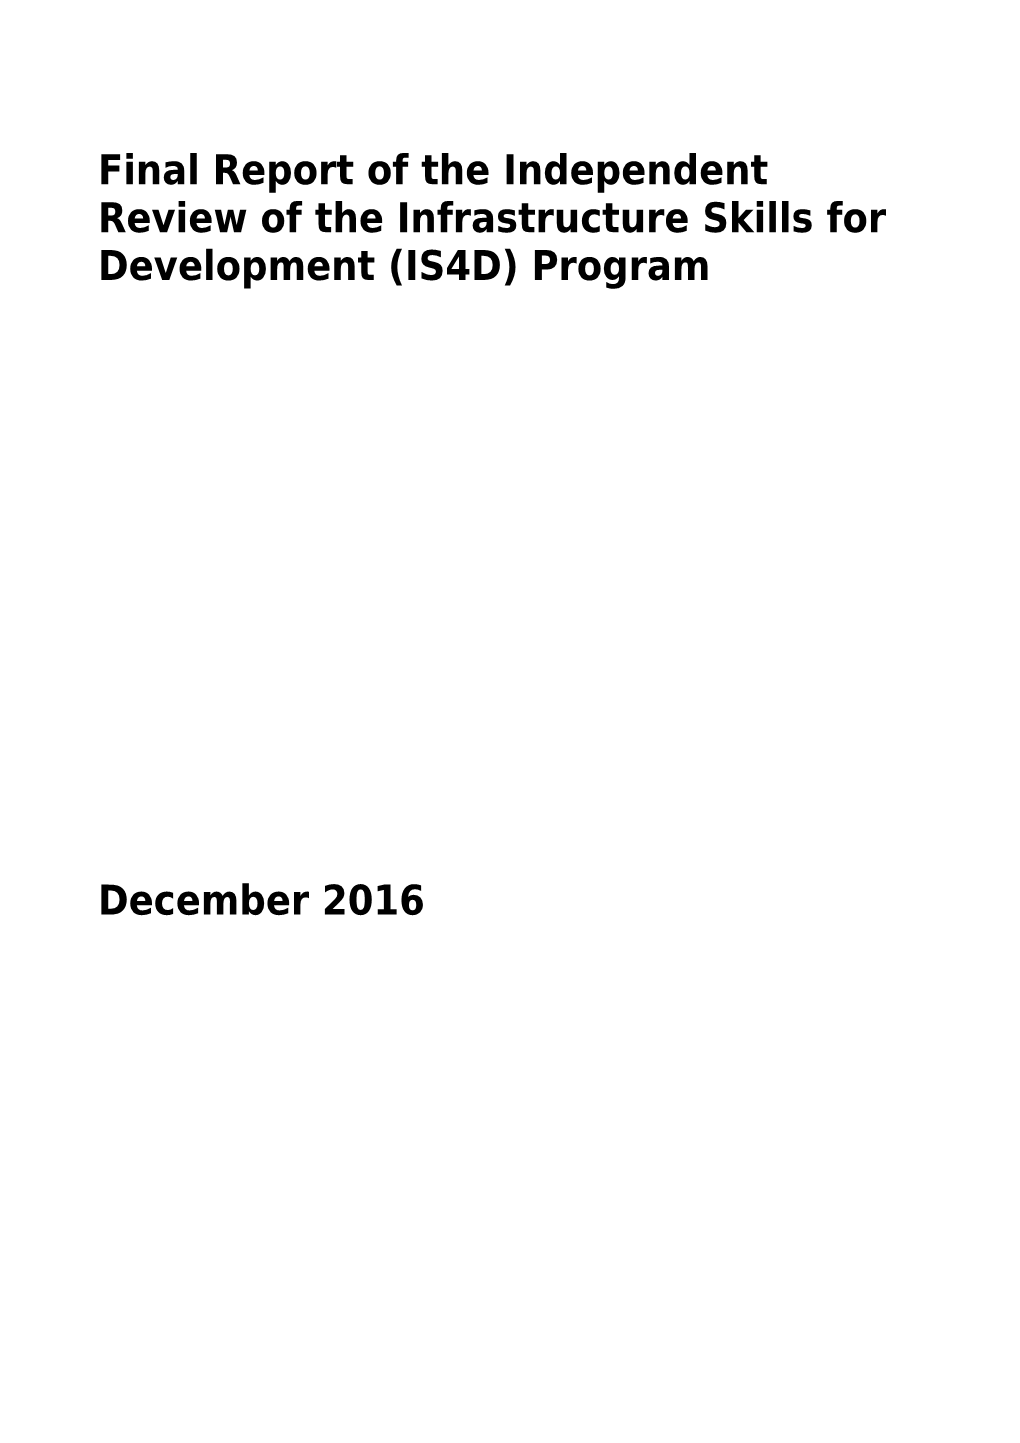 Infrastructure Skills for Development (IS4D) Program: Independent Review